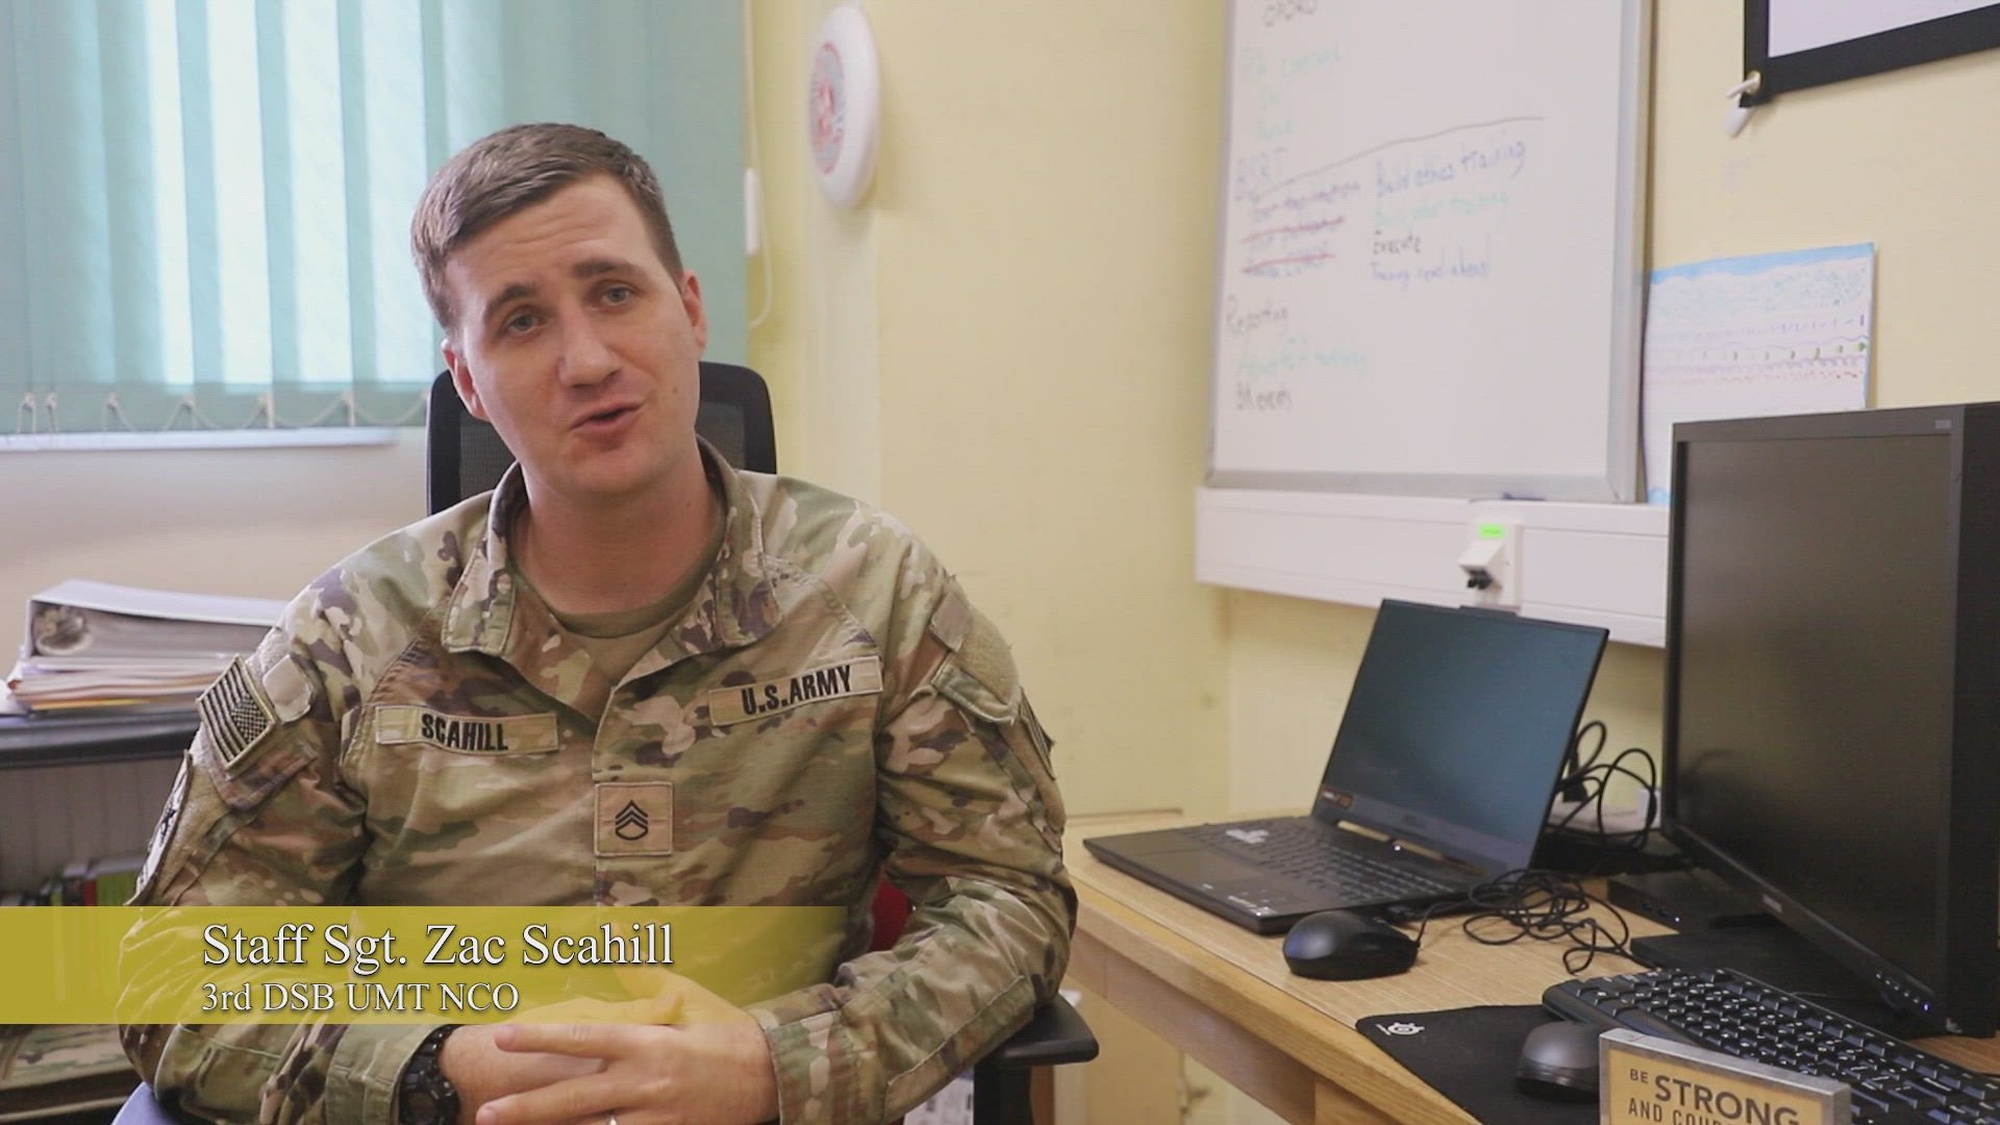 U.S. Army Staff Sgt. Zac Scahill, the unit ministry noncommissioned officer for the 3rd Division Sustainment Brigade, 3rd Infantry Division, and Sgt. 1st Class Paul Teregeyo, the brigades' Sexual Assault Response Coordinator, explains the importance of having healthy relationships available for Soldiers while deployed at Forward Operating Site Powidz, Poland, Nov. 8, 2023. The prevention workforce's mission is to provide holistic and creative initiatives to support Soldiers across the eight protective factors: food security, personal wellness, leadership, healthy outlets, healthy relationships, spiritual connectedness, finance, safe housing, and communities. (U.S. Army Video by Spc. Elsi Delgado)